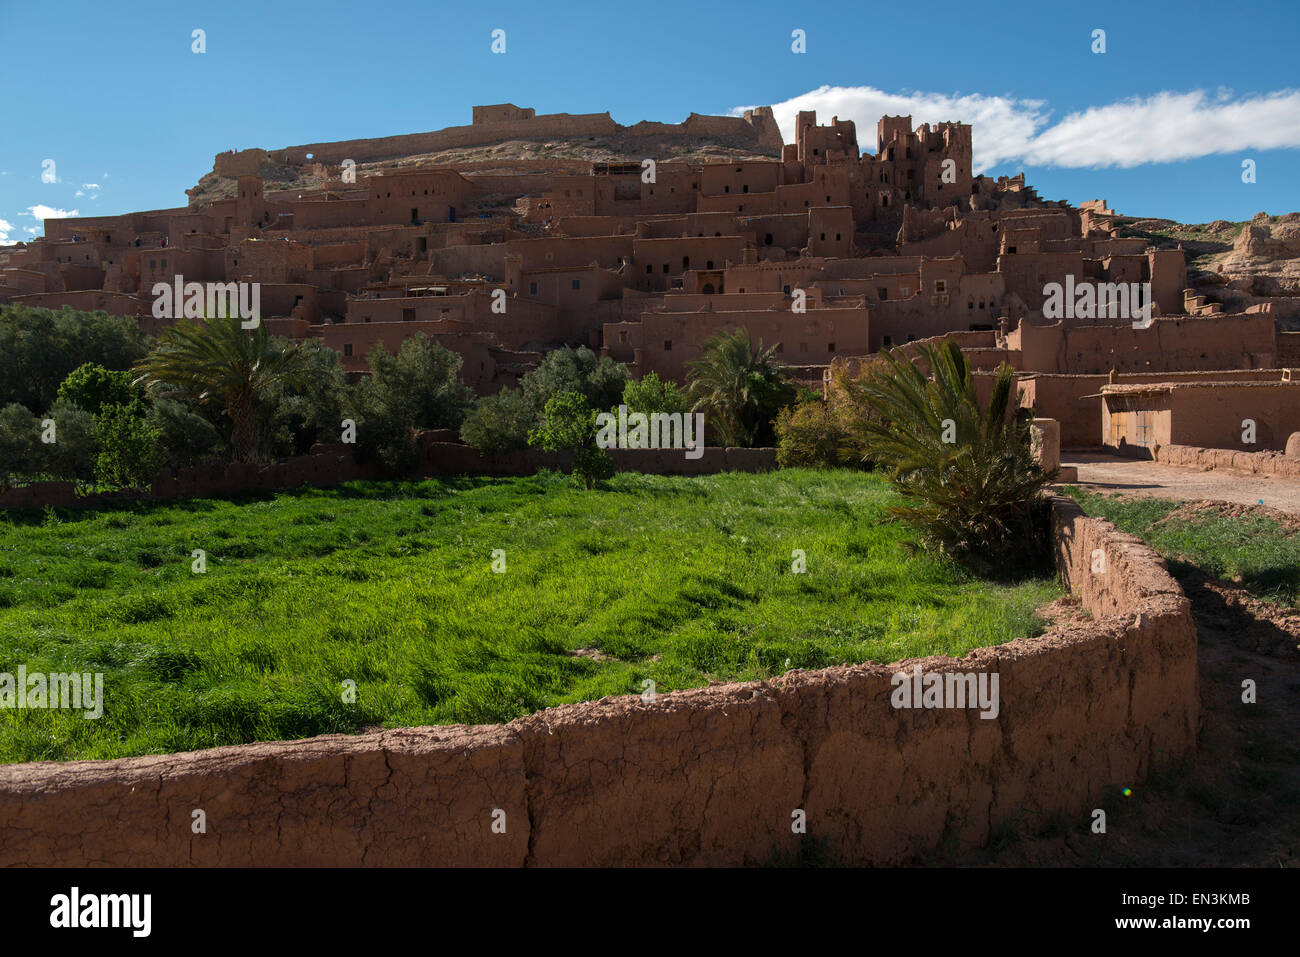 Ait Ben Haddou, World Heritage Site.  Fortified city, or Ksar, on Ounila River (Asit Ounila), along former caravan route. Stock Photo